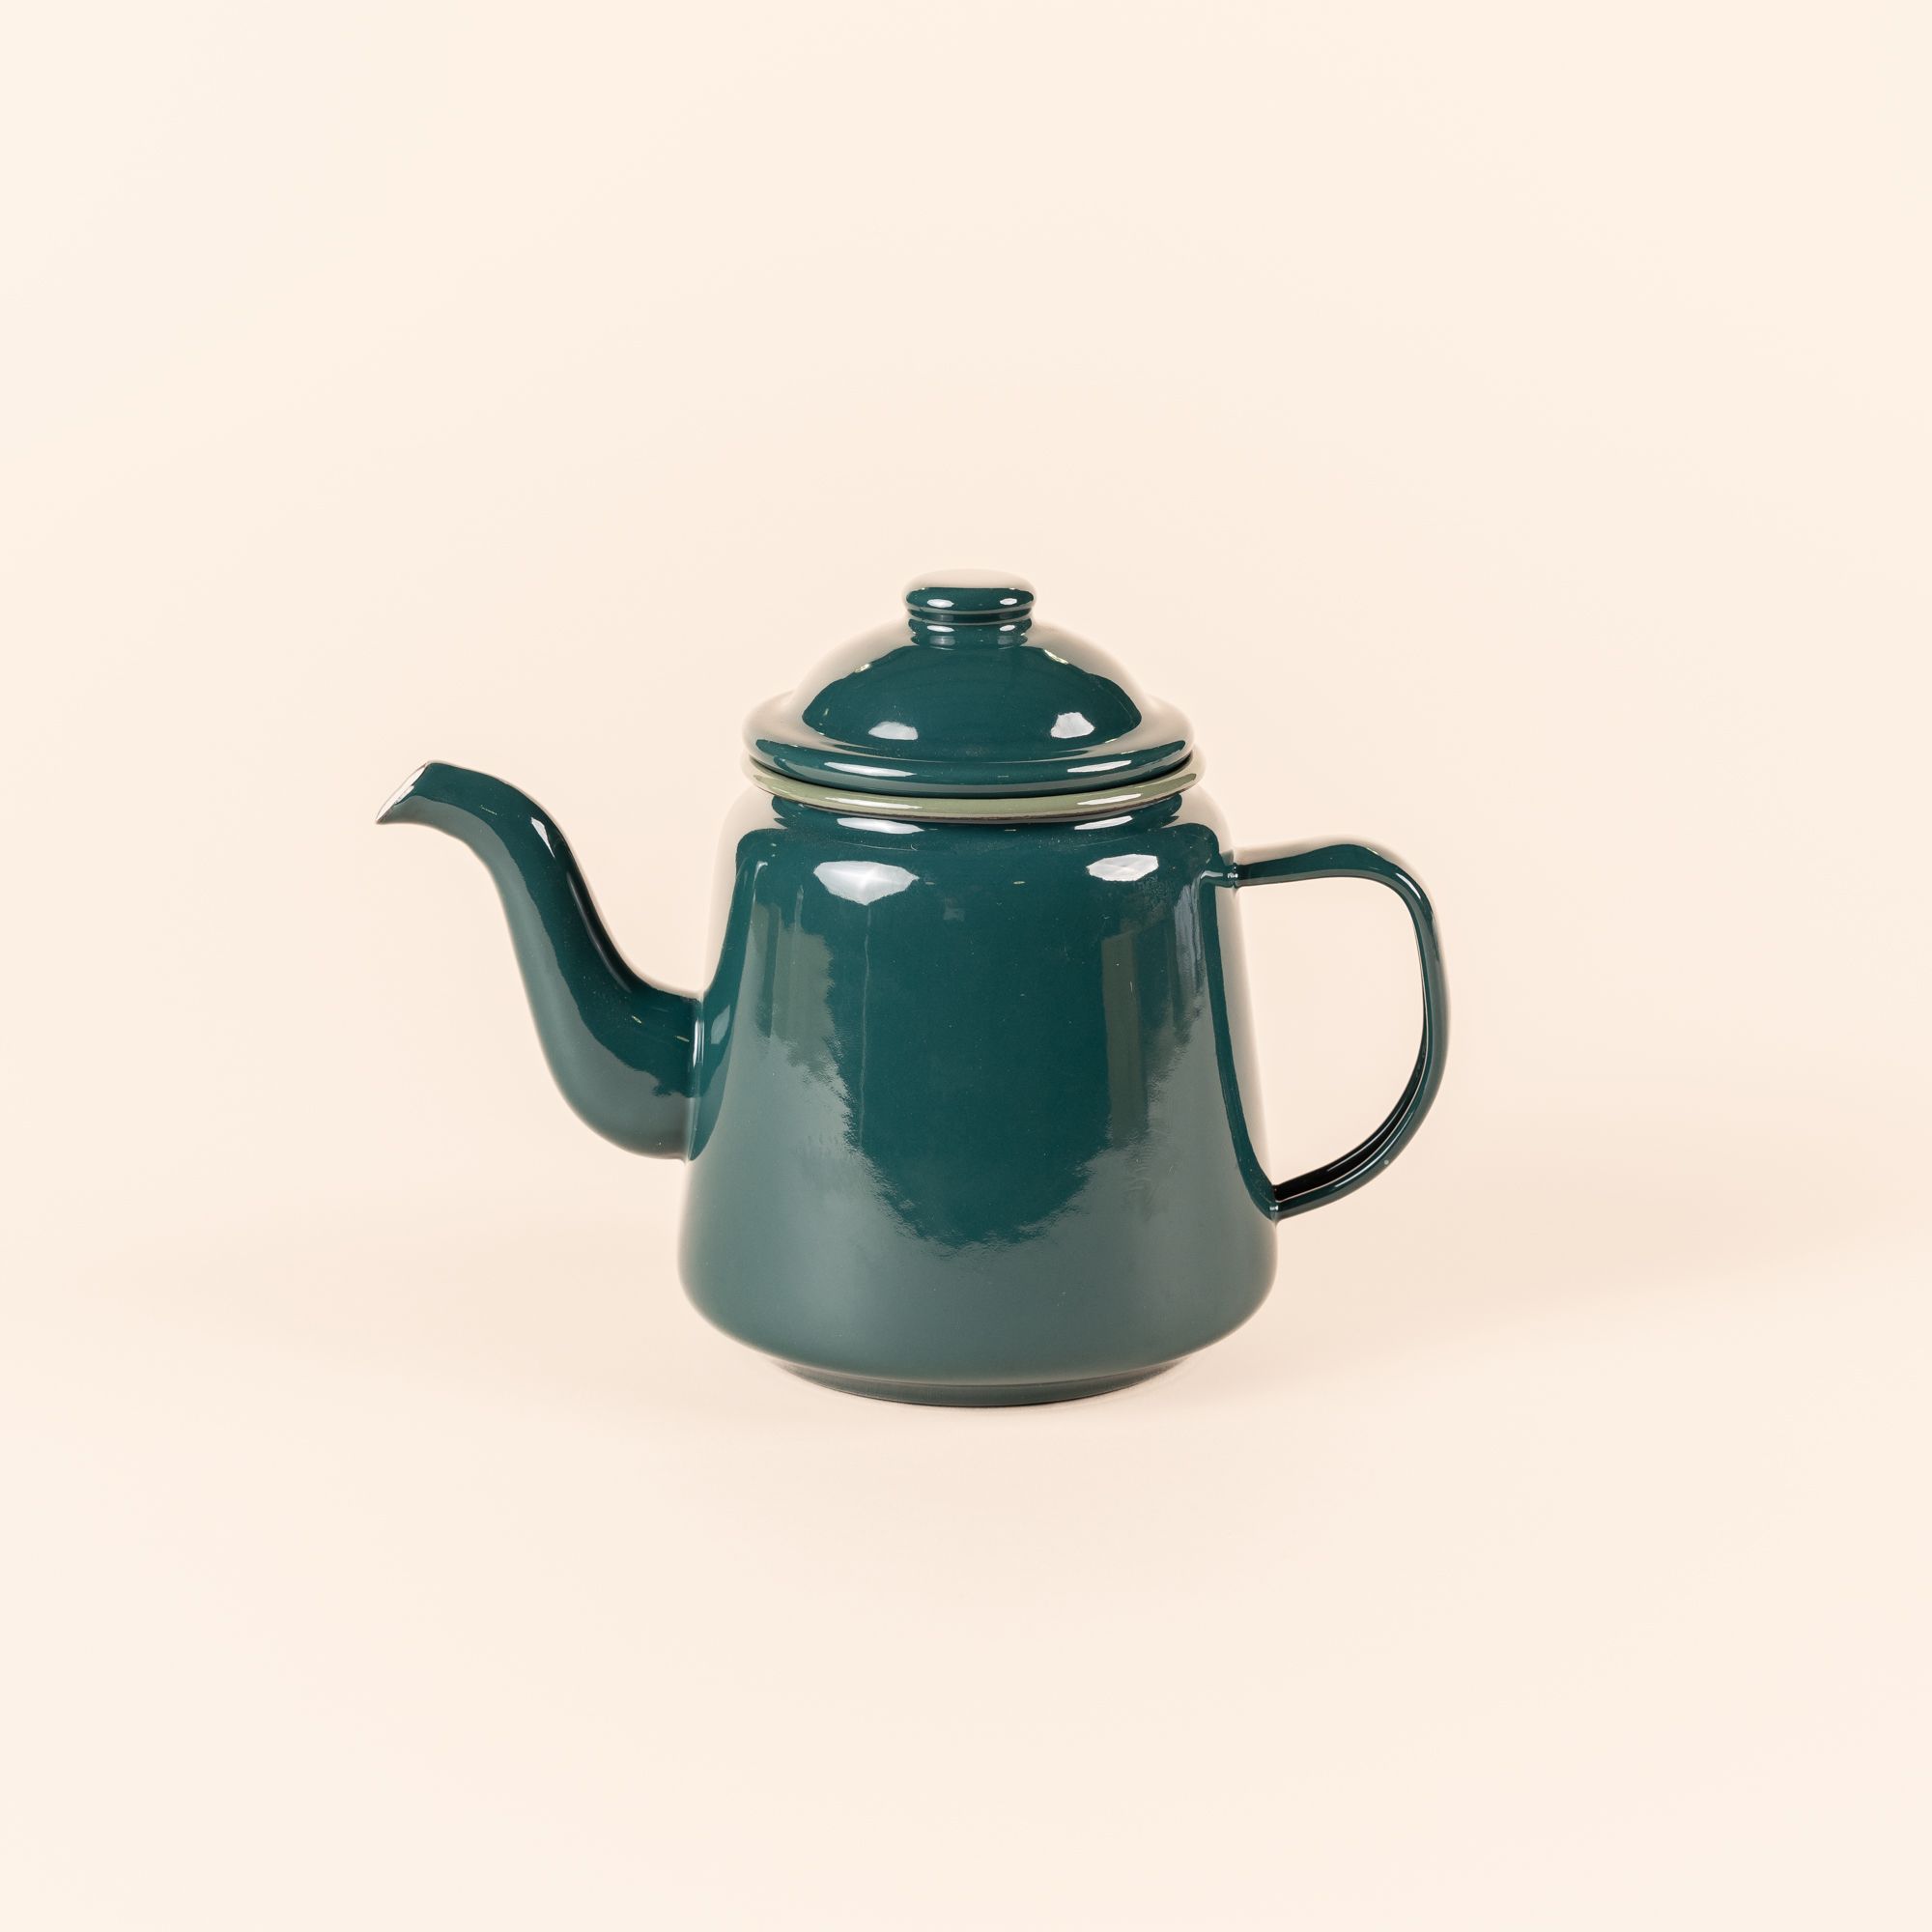 A deep dark teal enamel teapot with a thin handle, large spout, and simple lid